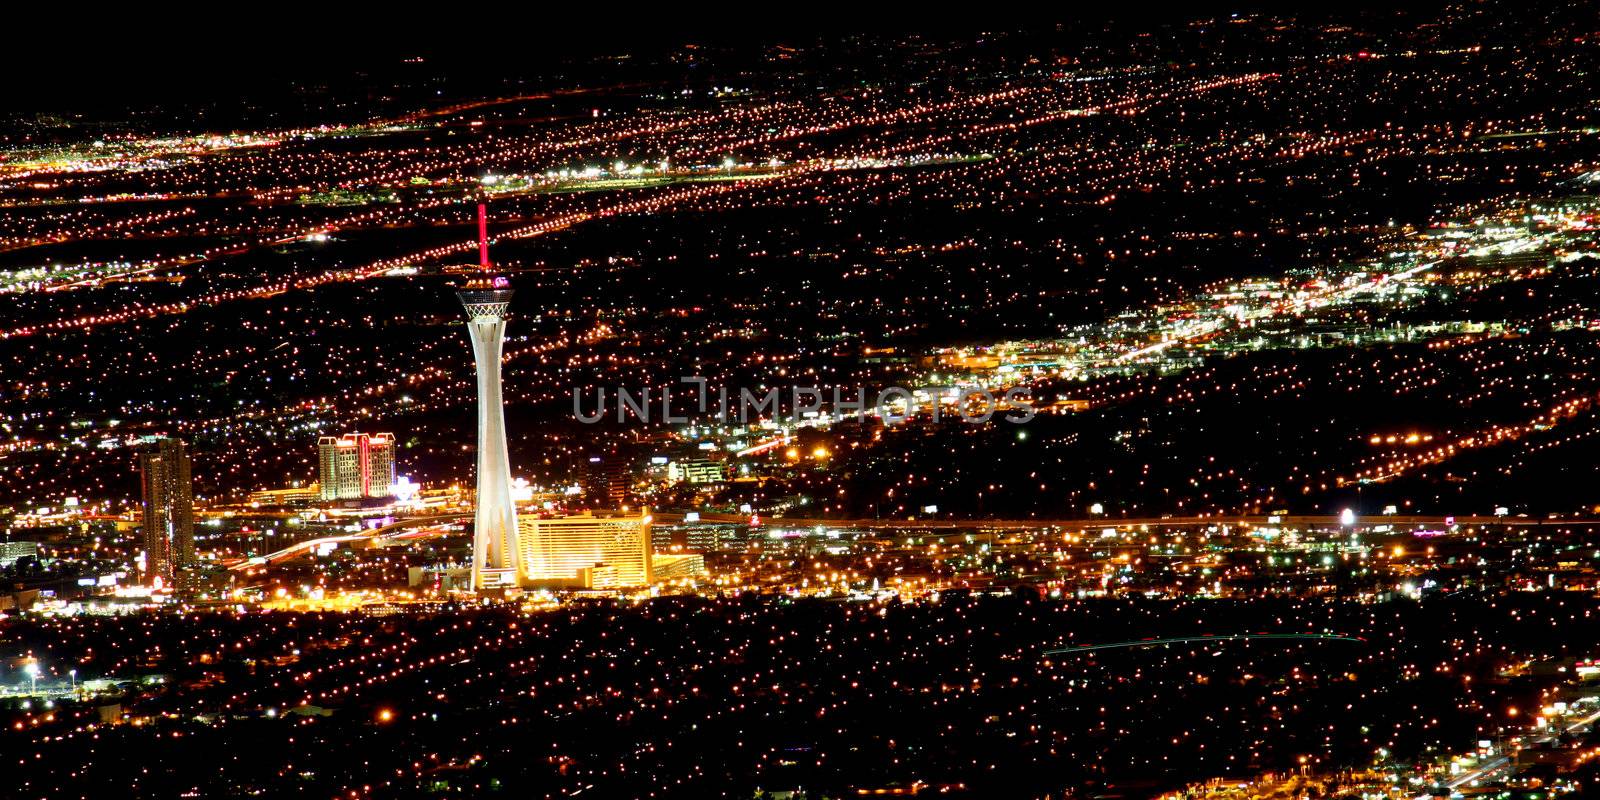 Las Vegas, USA - November 26, 2011: The Stratosphere Las Vegas hotel and casino opened in Nevada in 1996.  The Stratosphere Tower seen here is the tallest structure in Las Vegas standing at over 1,100 feet in height.